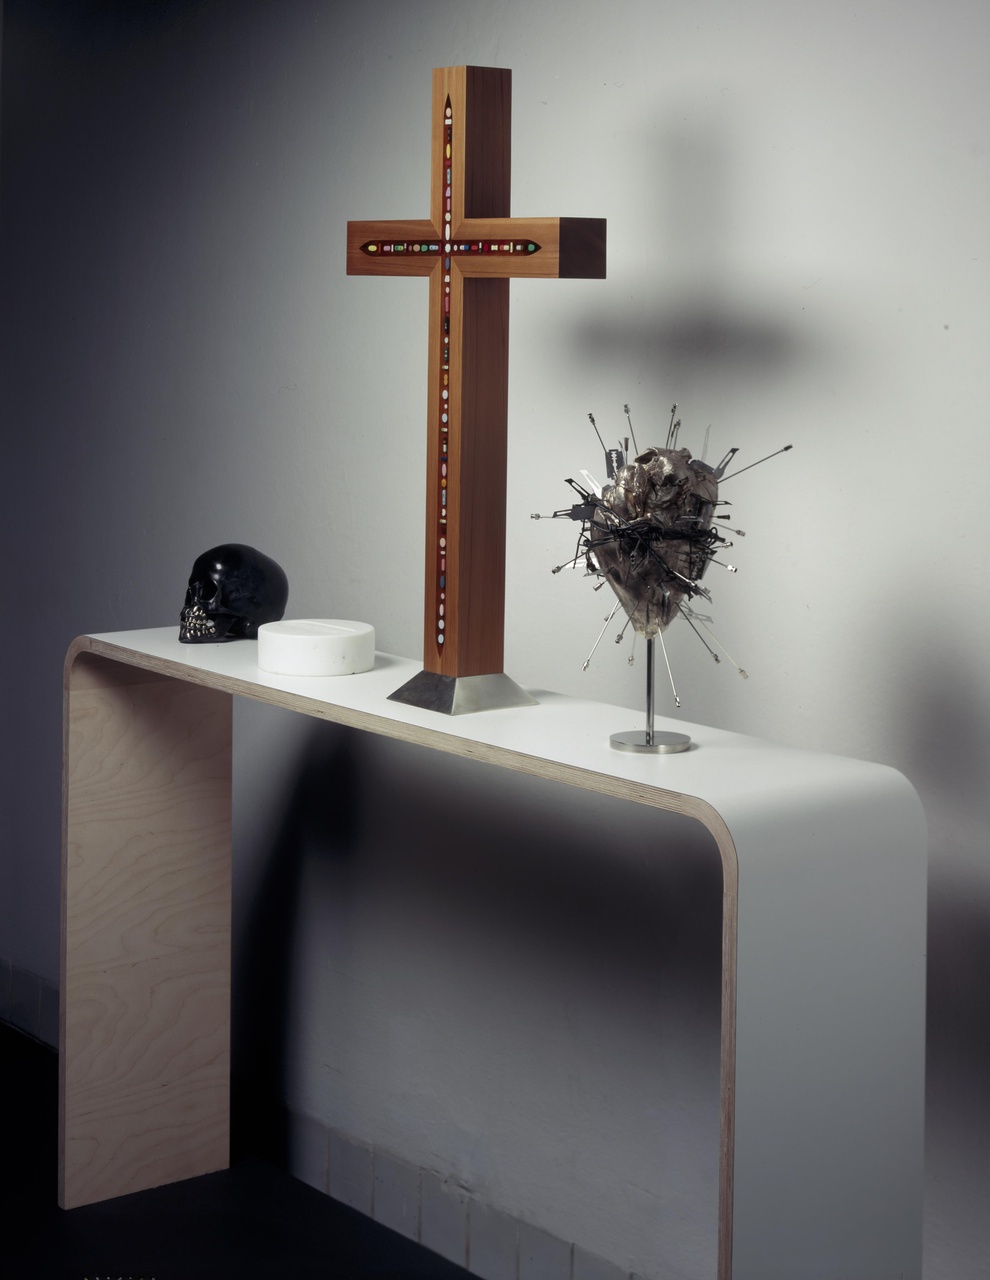 The Altar (The fate of man, The eucharist, The crucifix, The sacred heart)